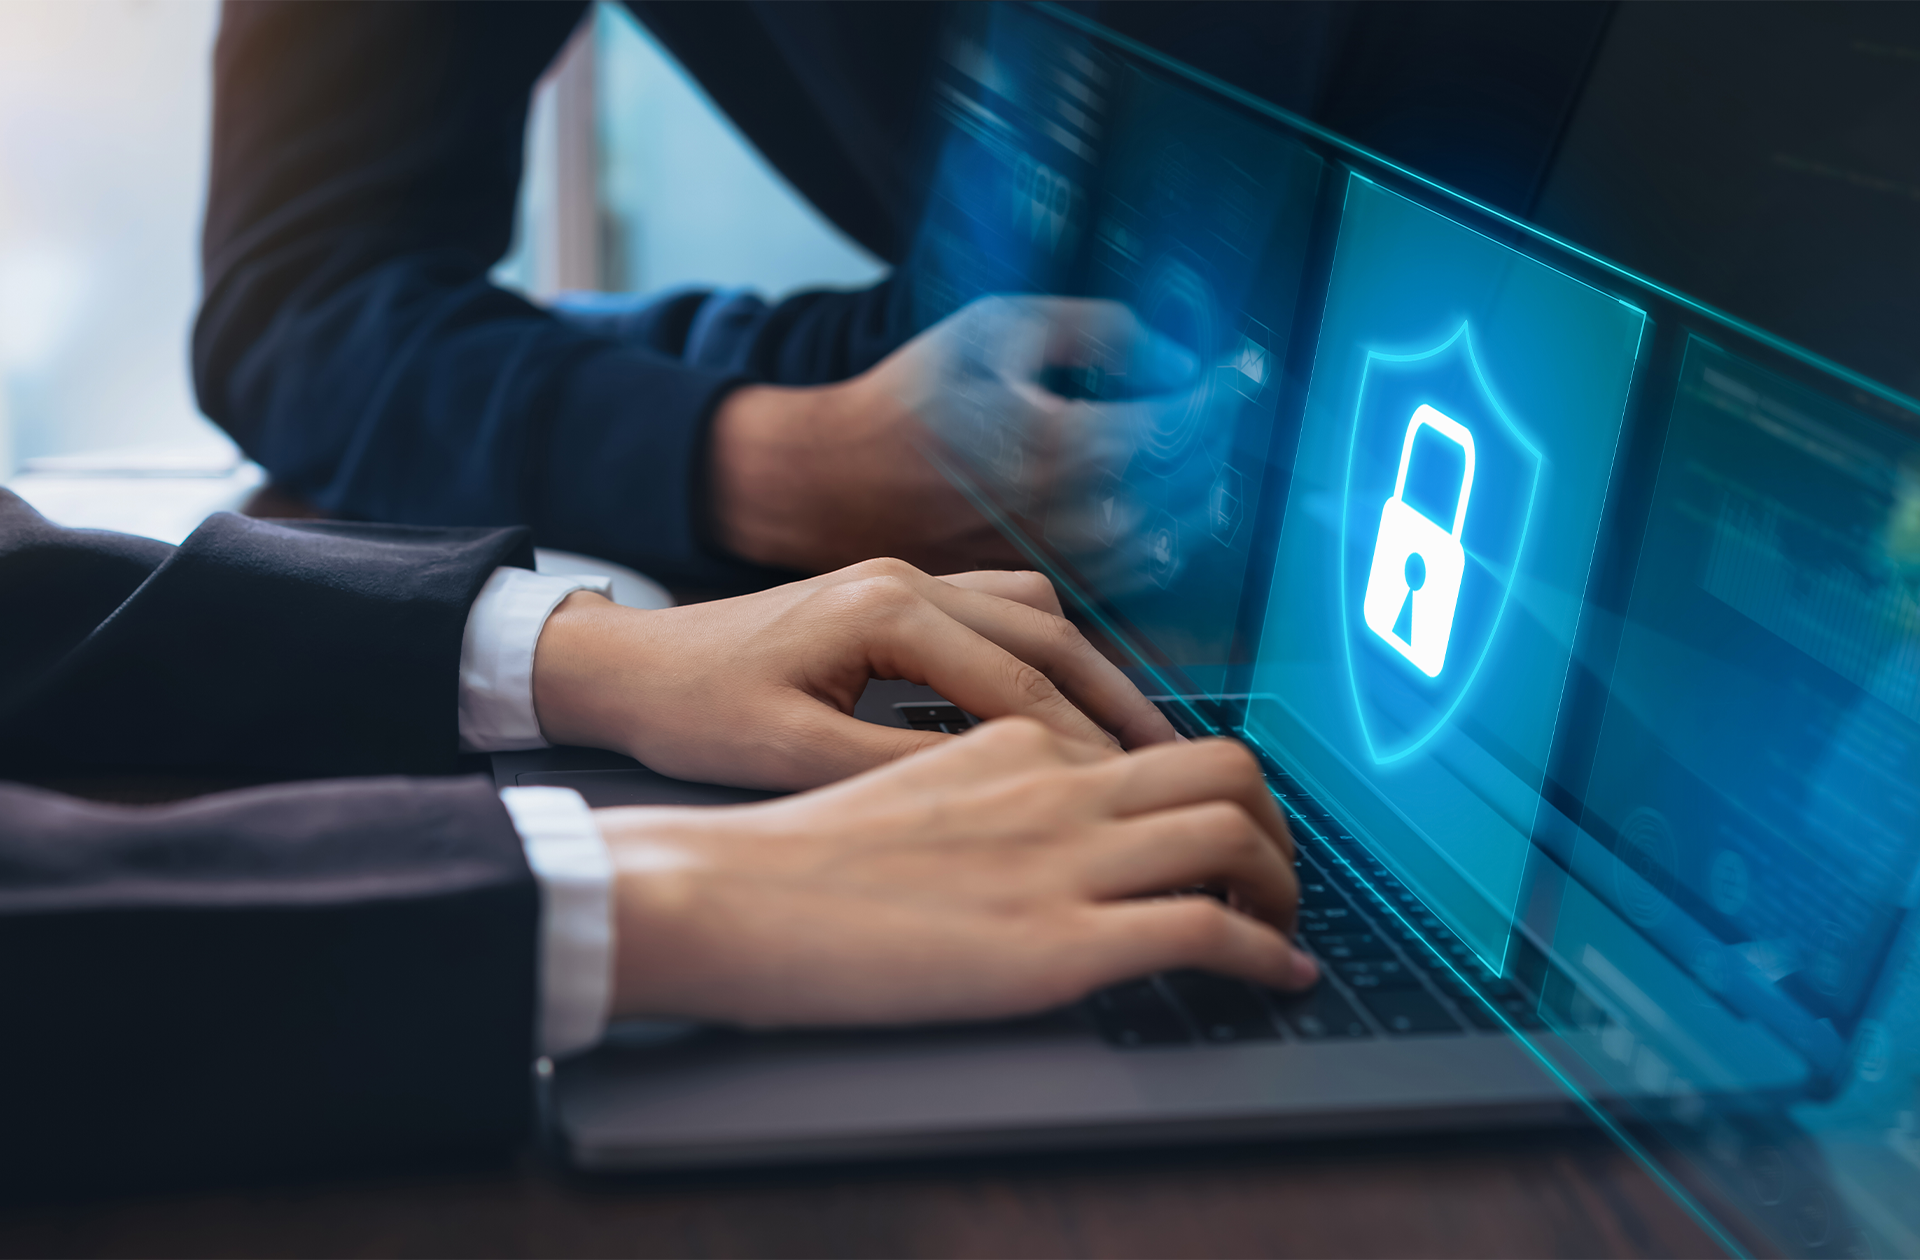 With cyber-attacks impacting more and more businesses every day, it’s important for organisations to demonstrate their commitment to cyber security to put customers at ease.